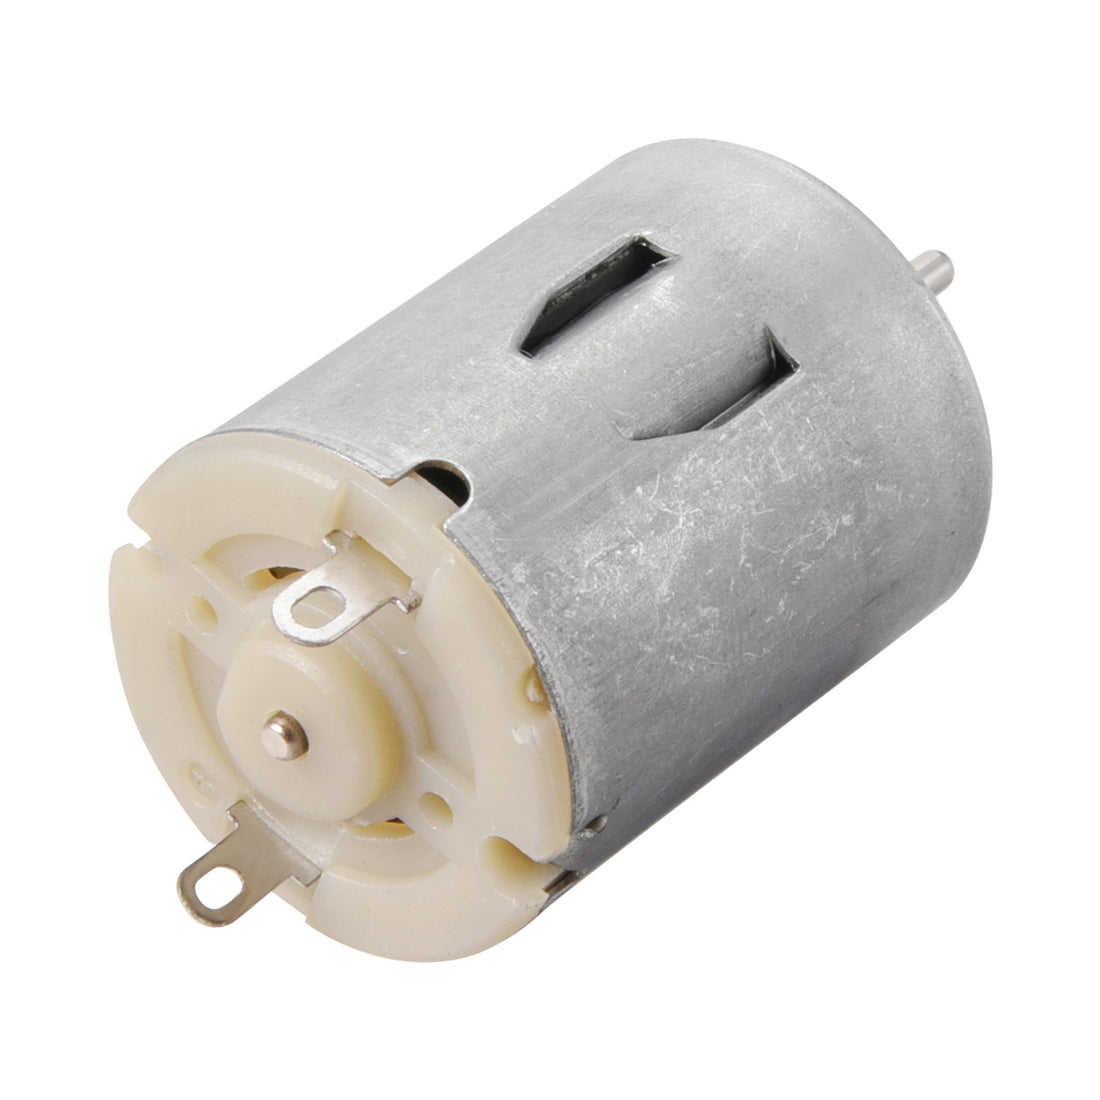 uxcell Uxcell DC Motor 3V 19000RPM 0.7A Electric Motor Round Shaft for RC Boat  Model DIY Hobby 2Pcs